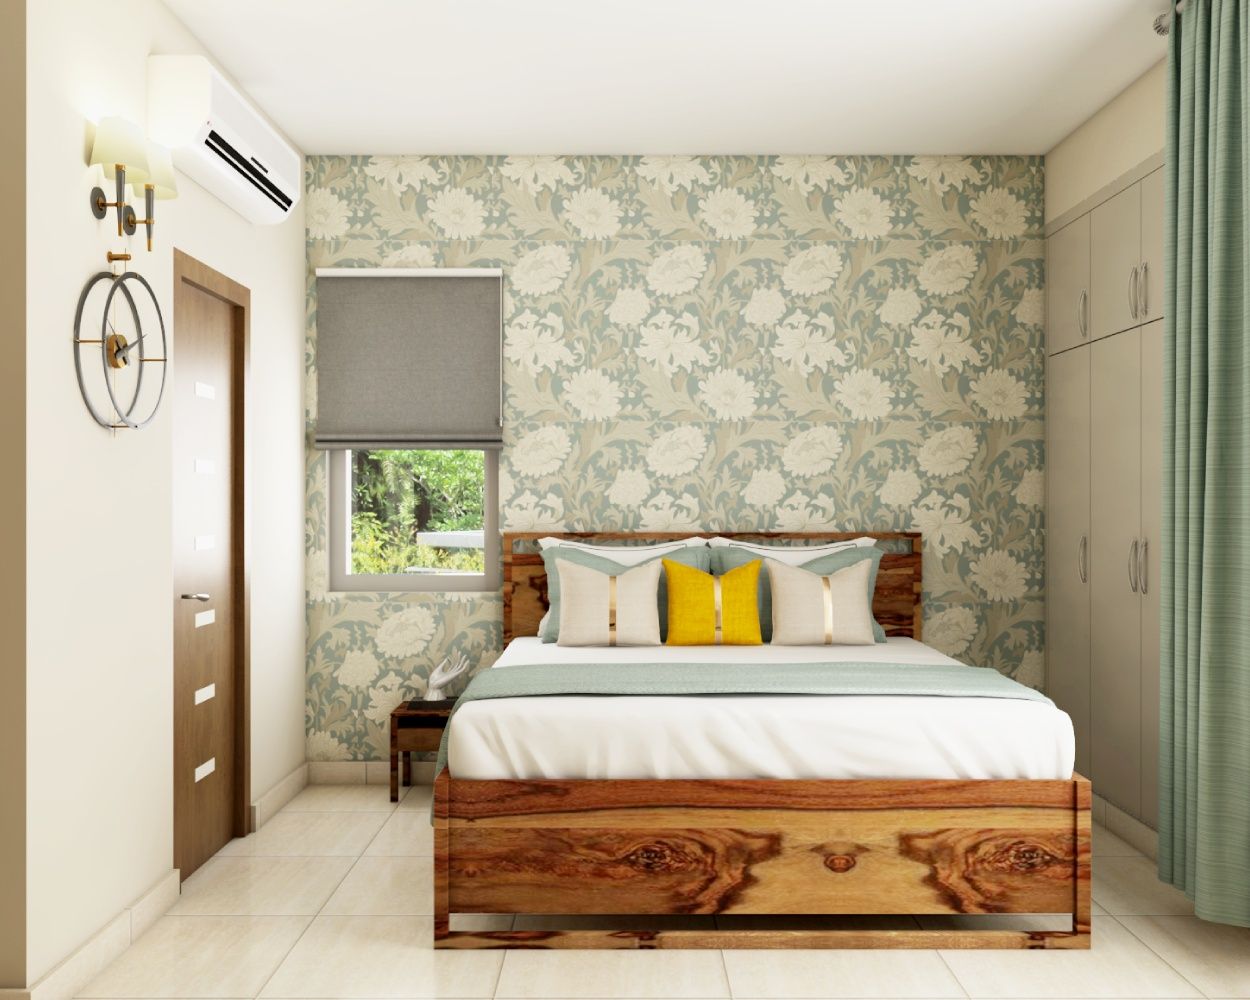 Tropical Bedroom Wallpaper Design With Forest-Themed Motifs